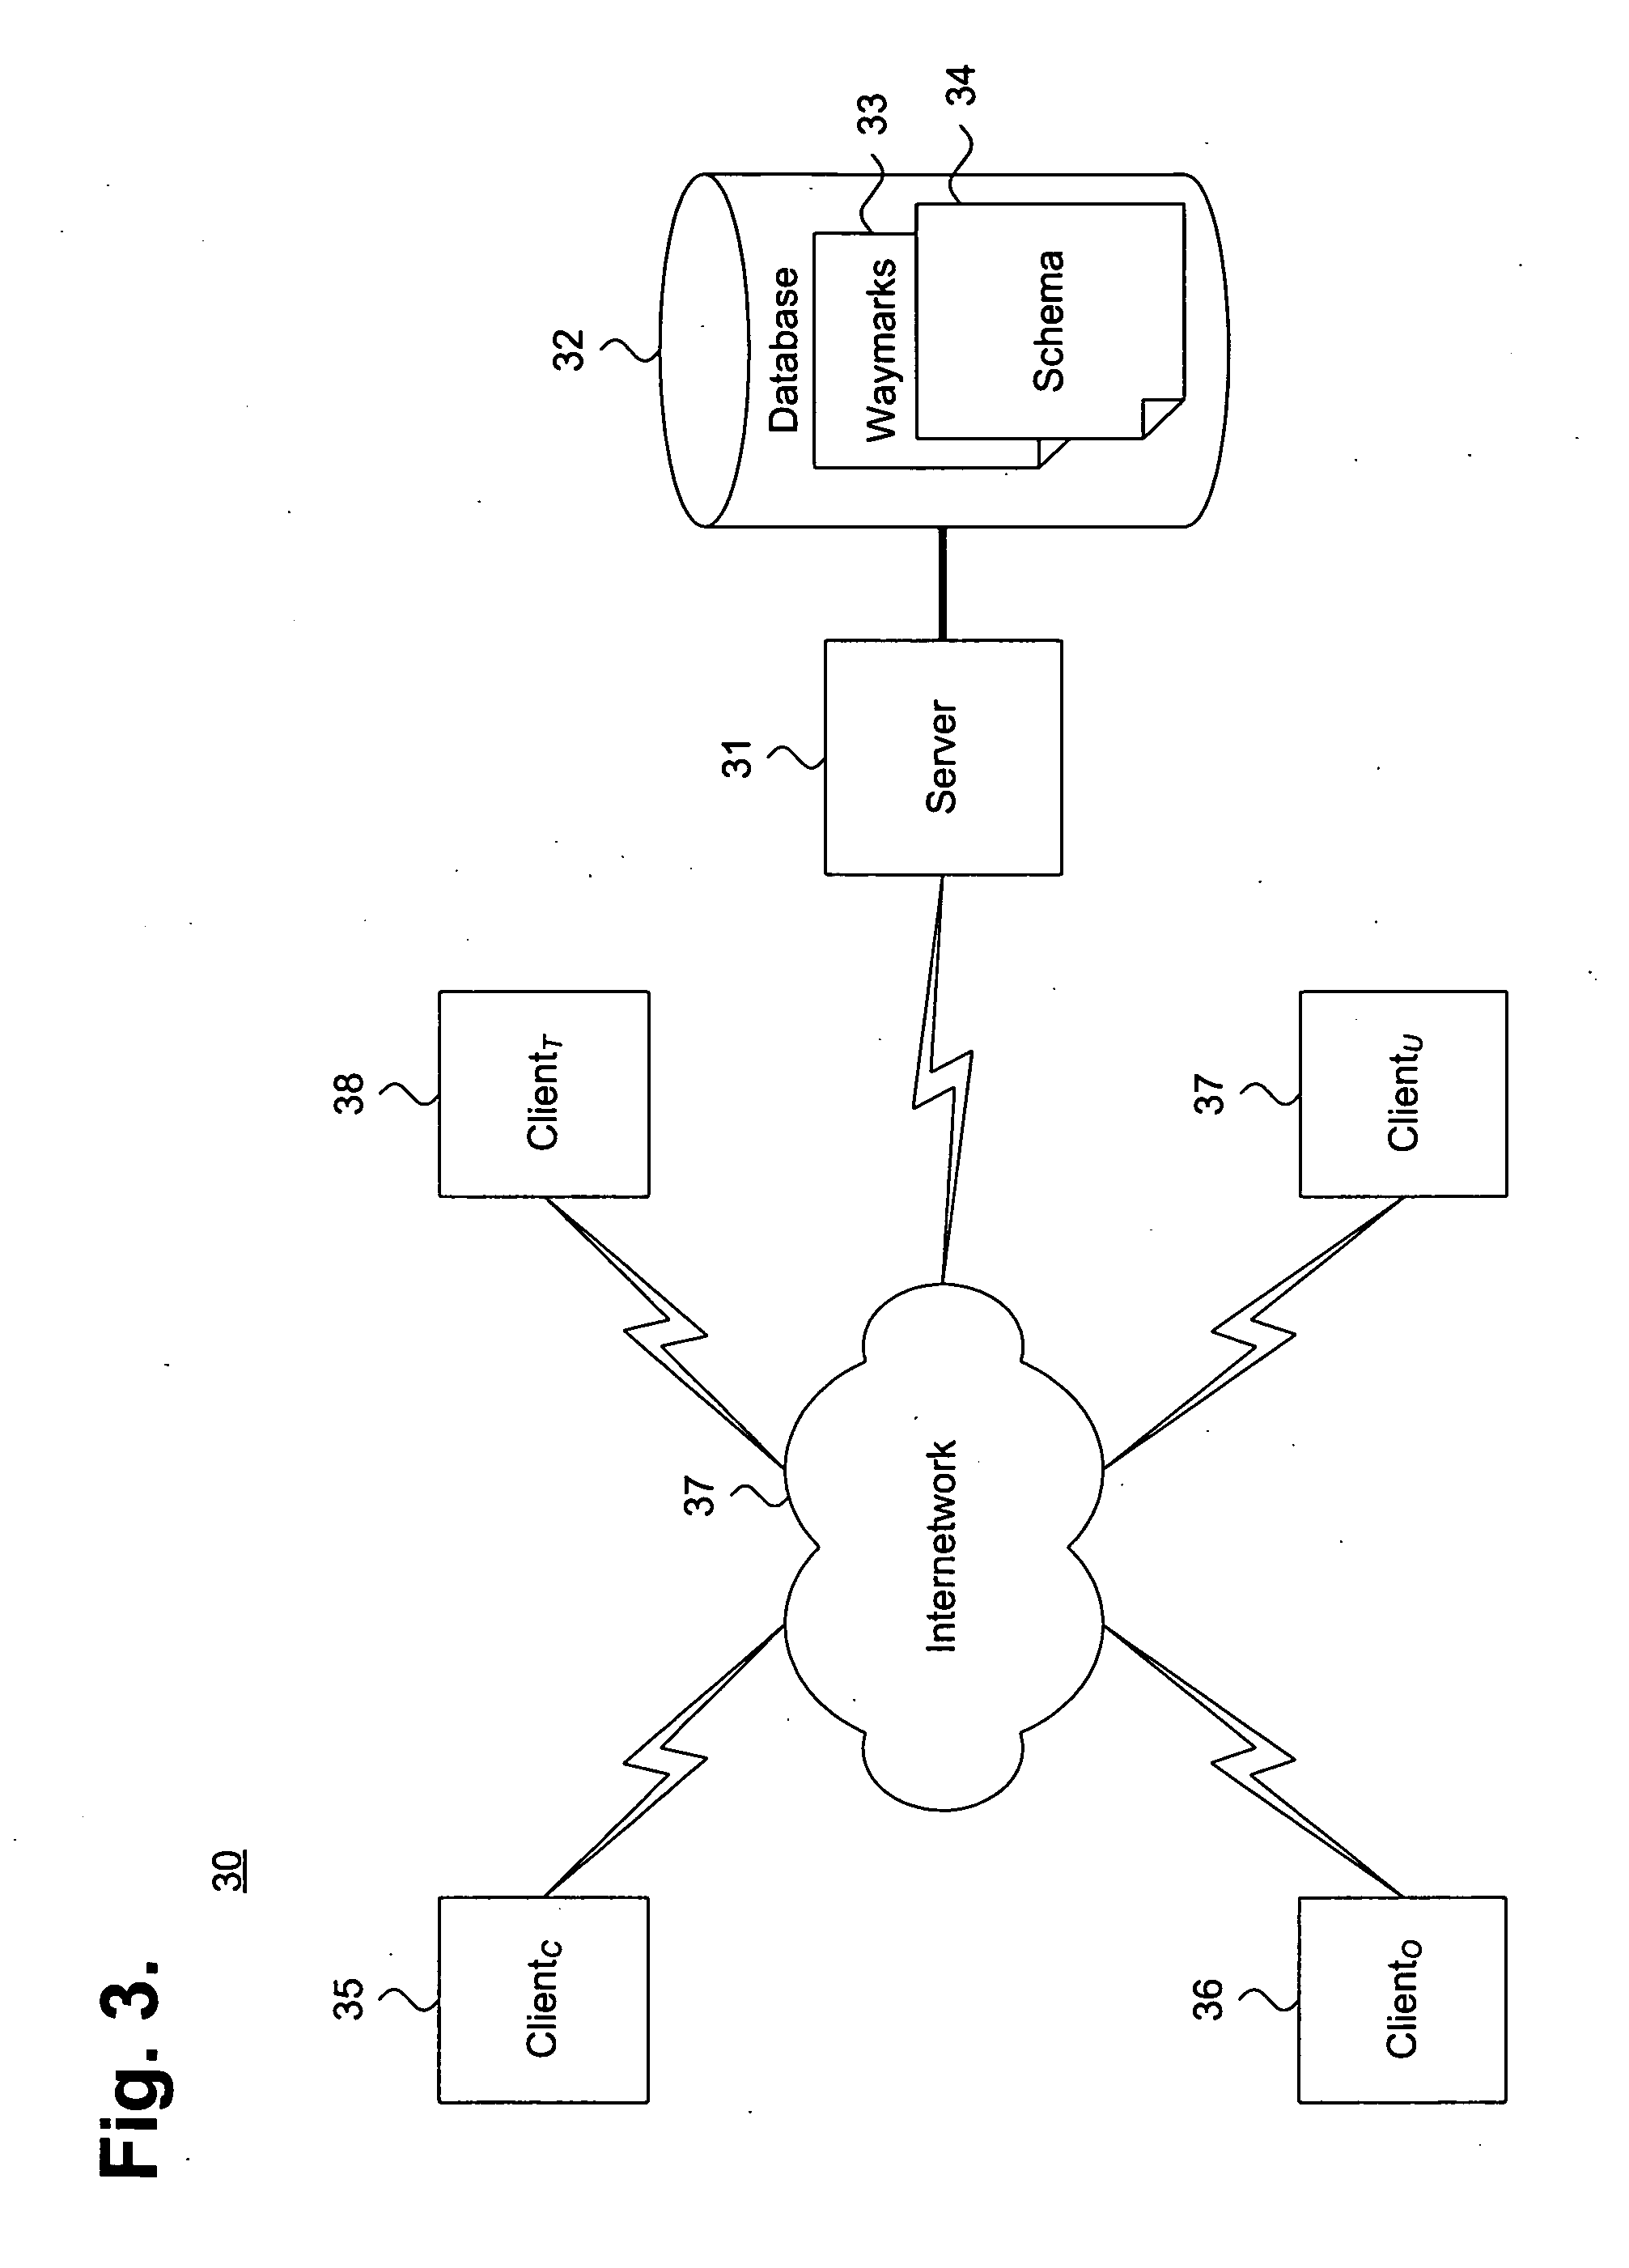 System and method for facilitating ad hoc compilation of geospatial data for on-line collaboration